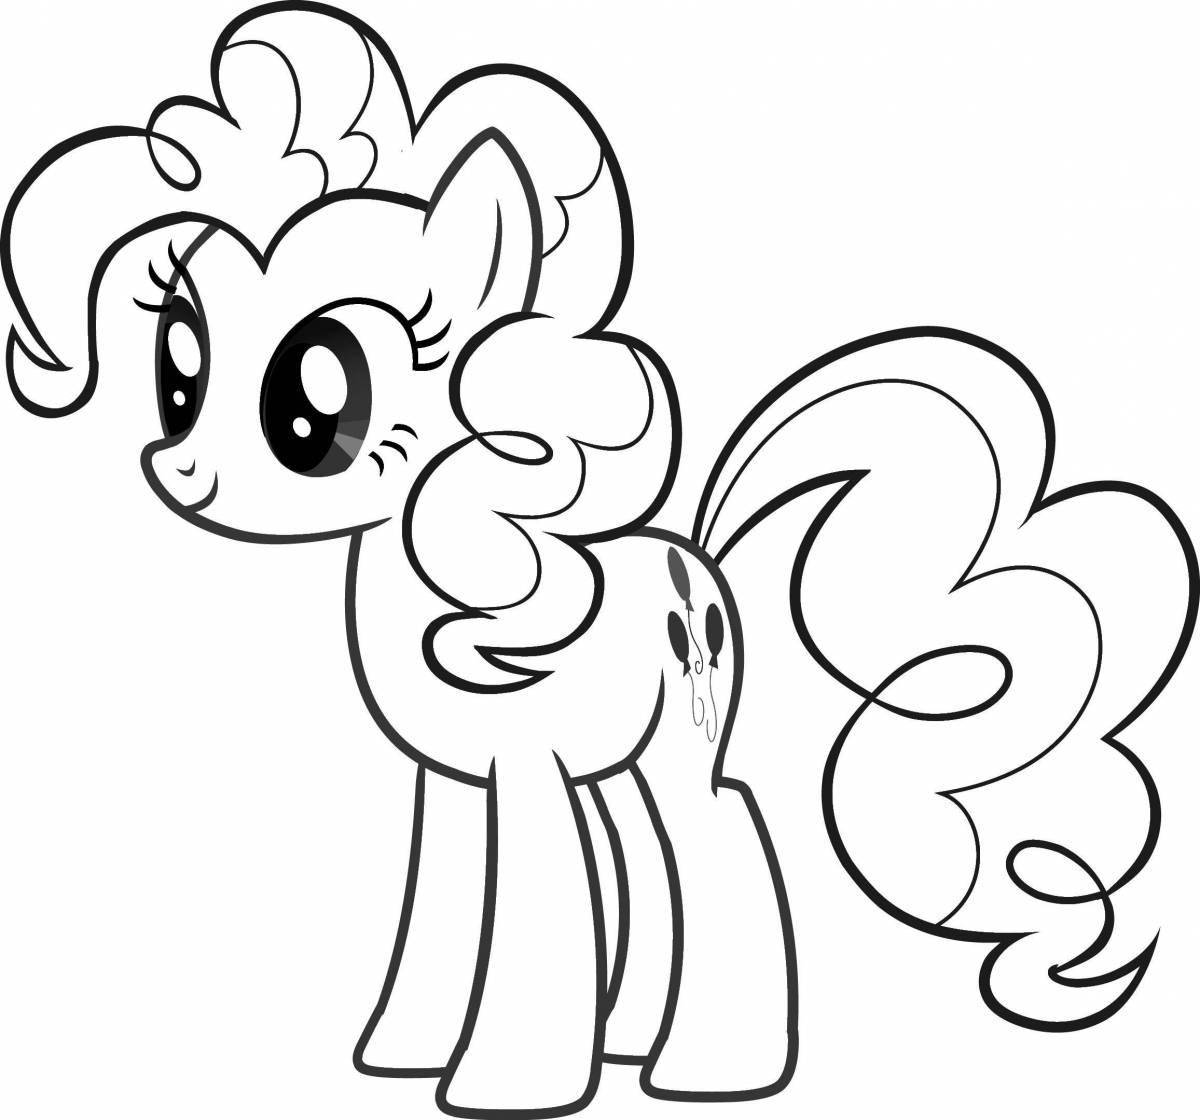 Coloring page delicious pinkie pie